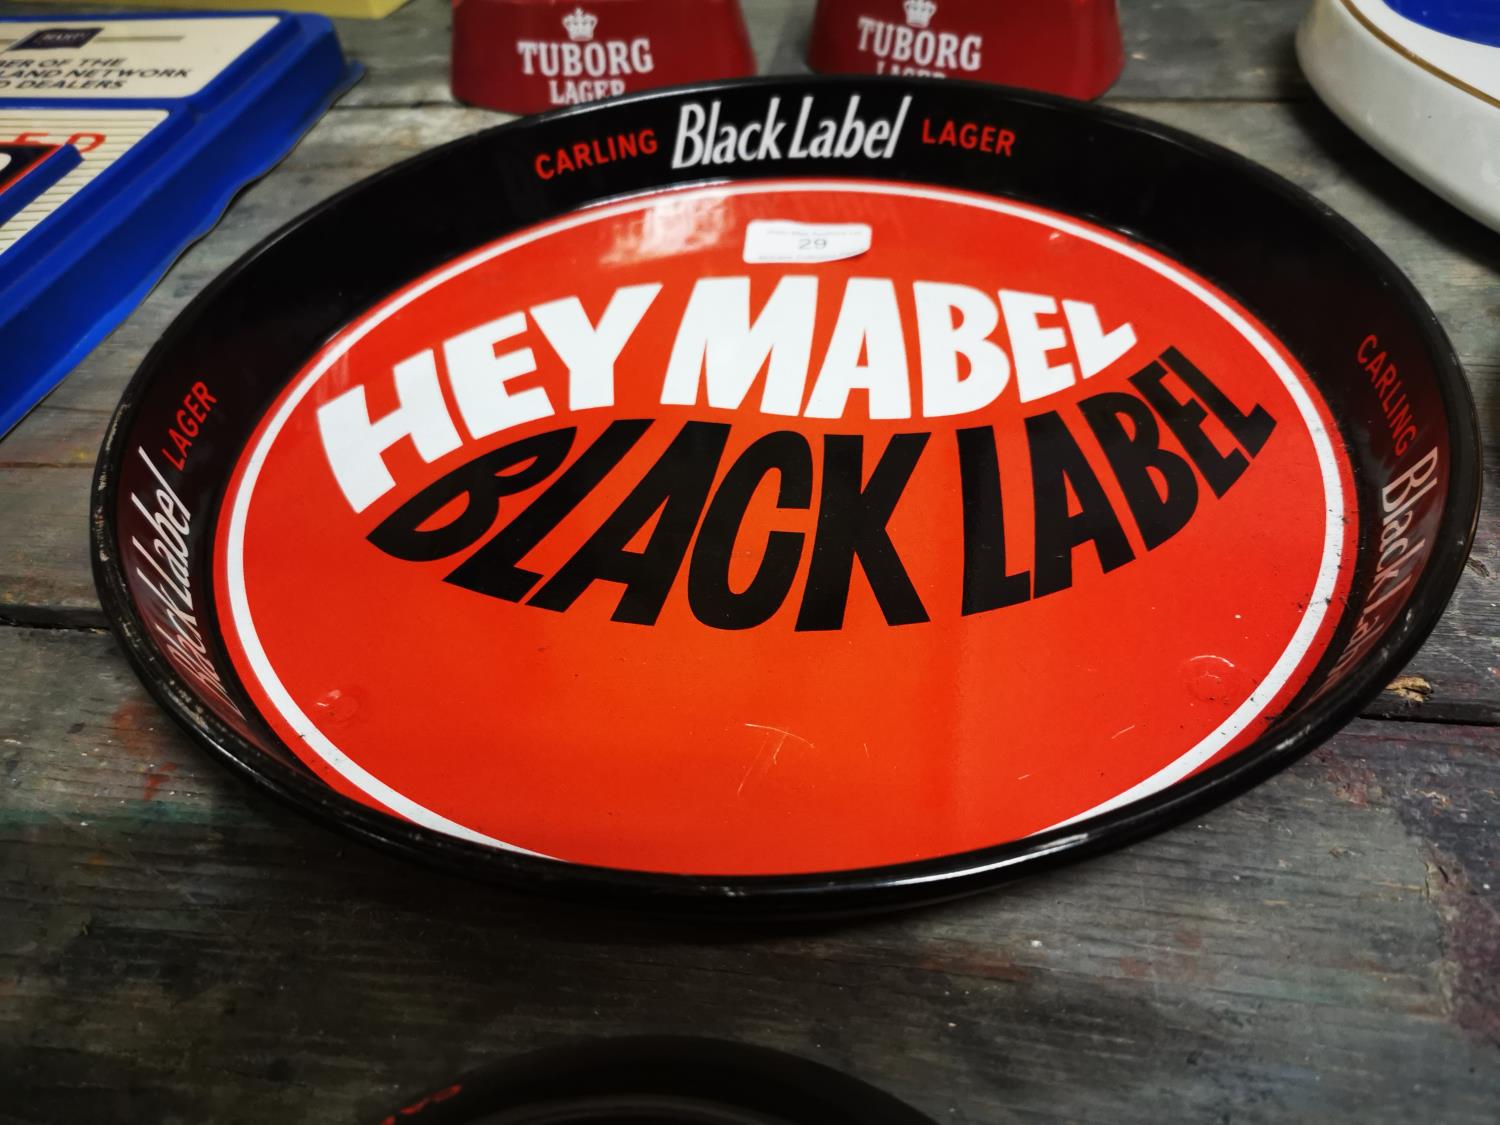 Black Label advertising tinplate tray and ashtray - Image 2 of 3